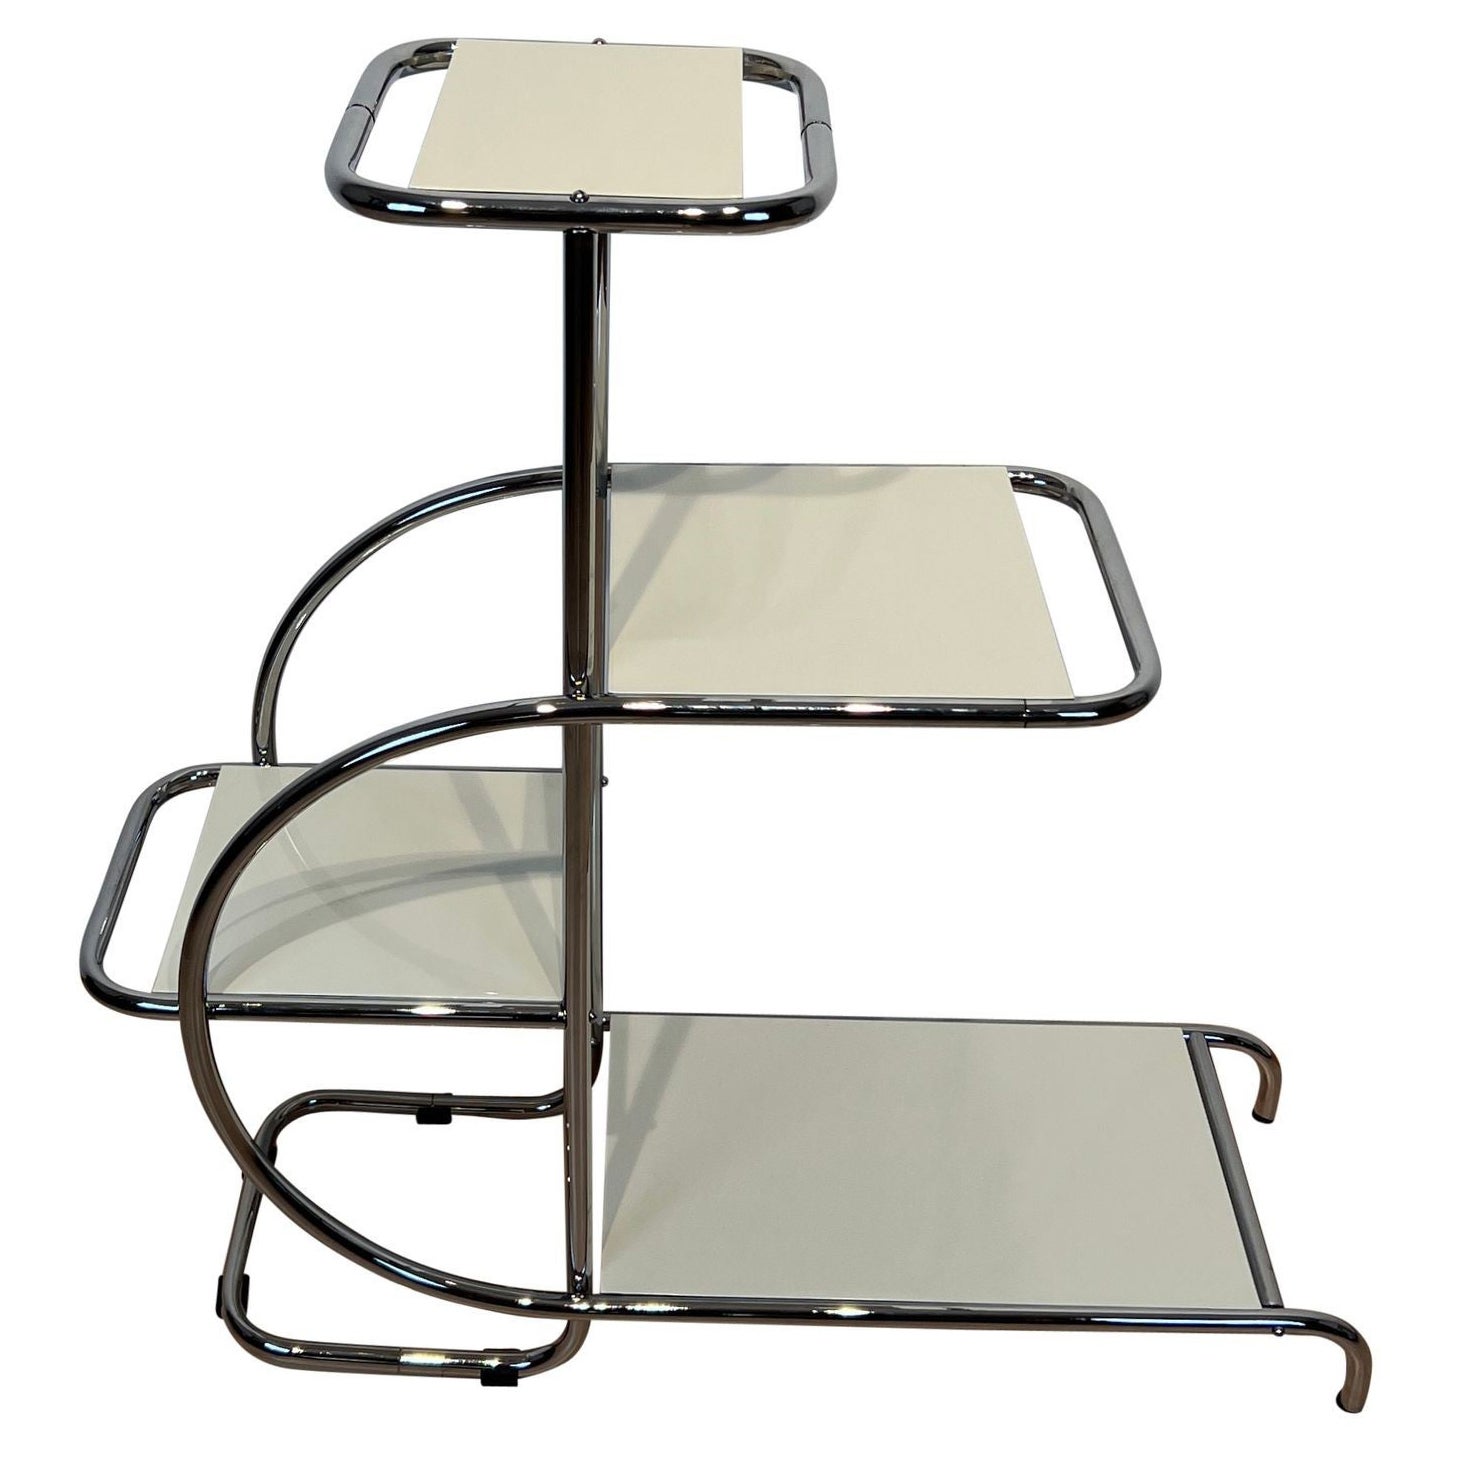 Bauhaus Steeltube Etagere, Creme-White Lacquer, Nickel Plate, Germany, 1930s For Sale